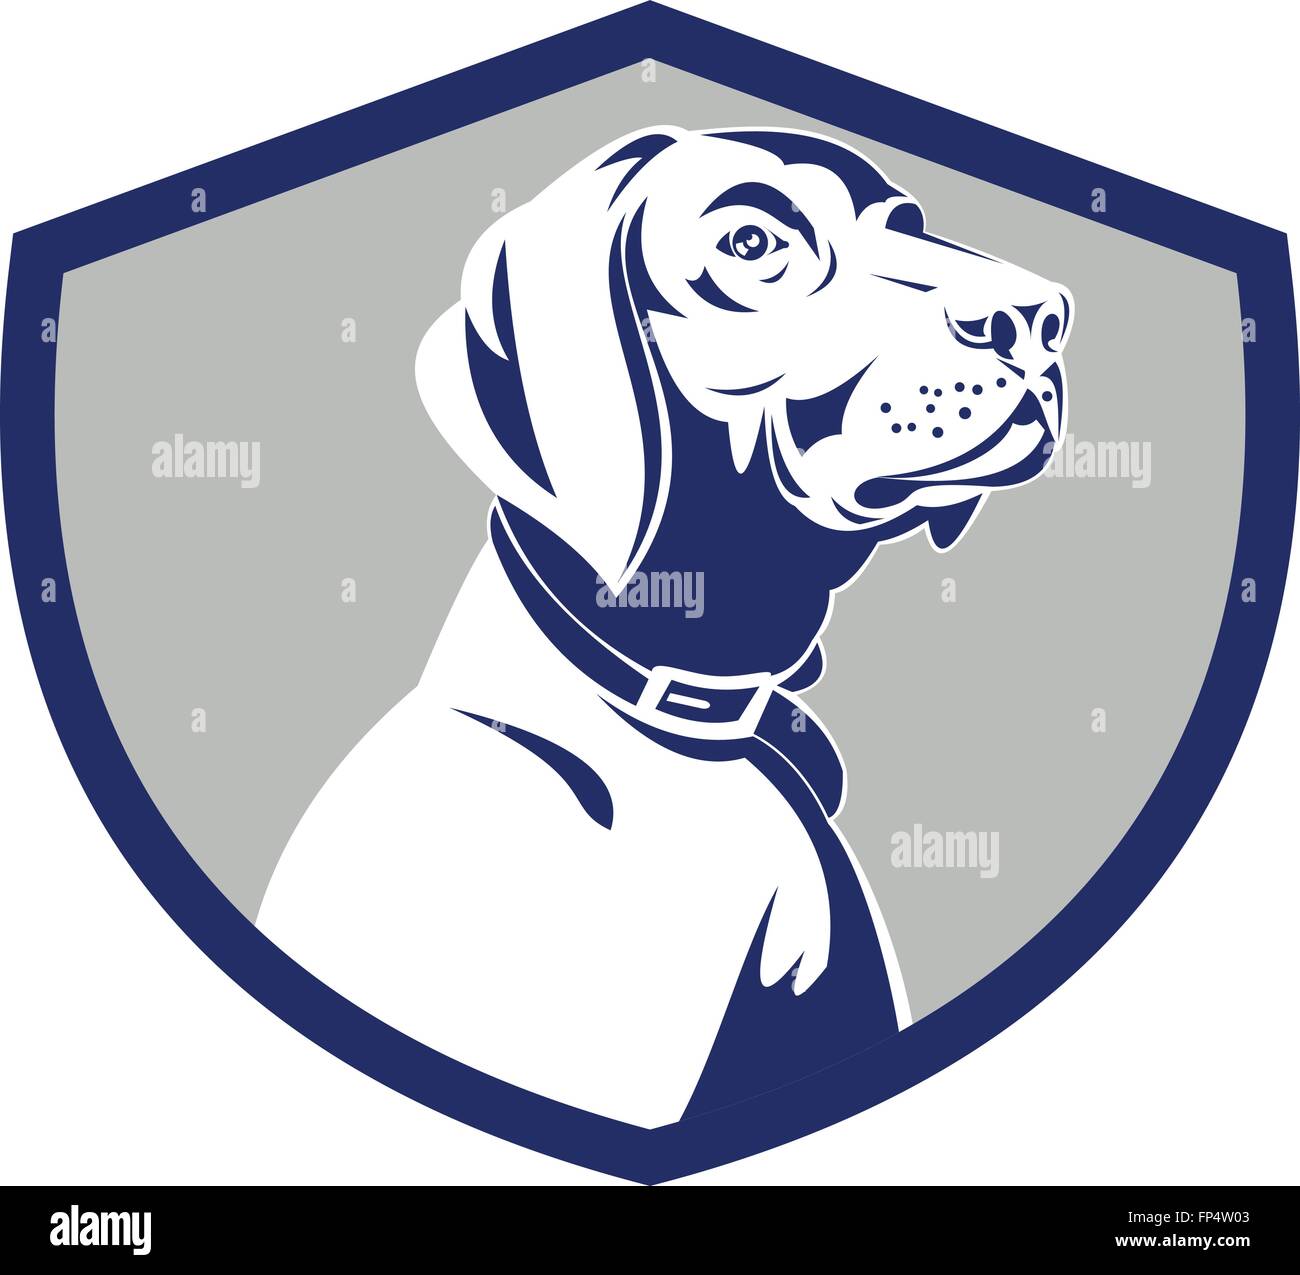 Illustration of a pointer dog head profile looking to the side set inside shield crest on isolated background done in retro style. Stock Vector